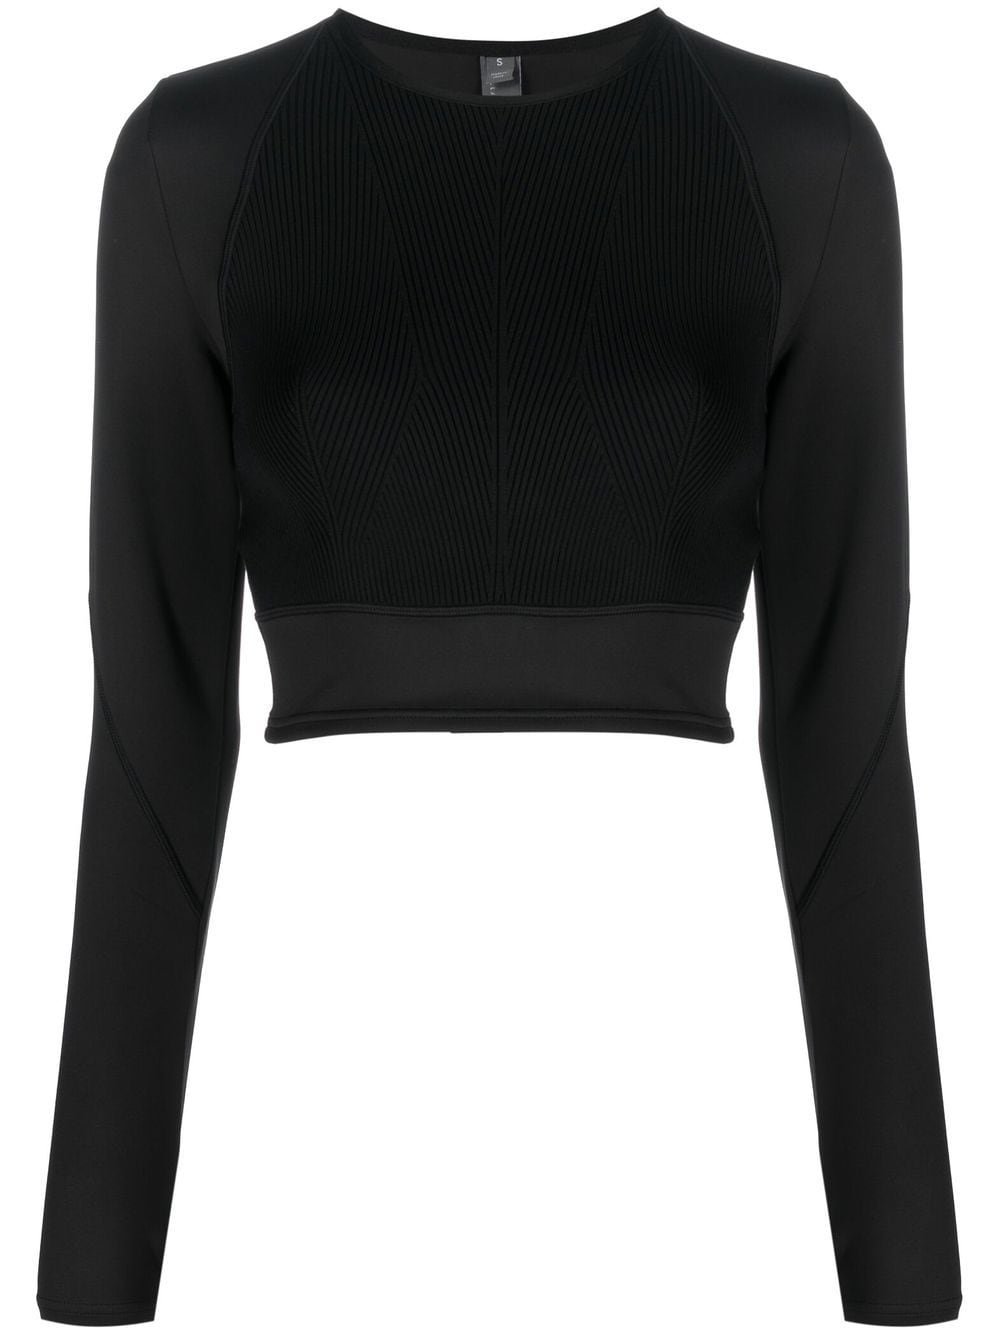 adidas by Stella McCartney contrasting ribbed-knit crop top - Black